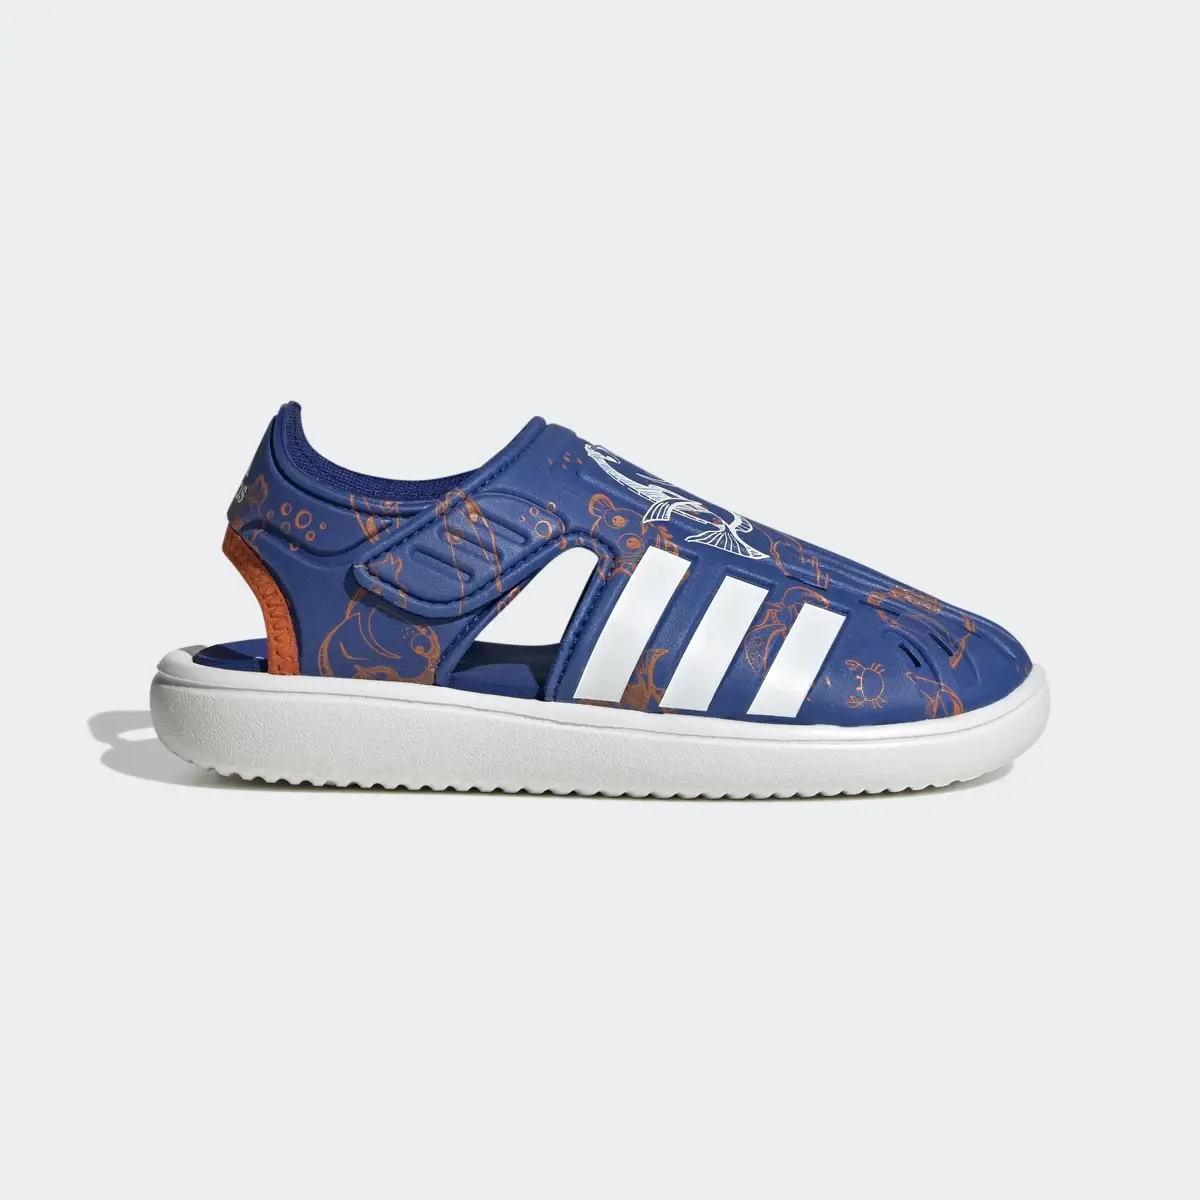 Adidas Finding Nemo and Dory Closed Toe Summer Sandalet. 2